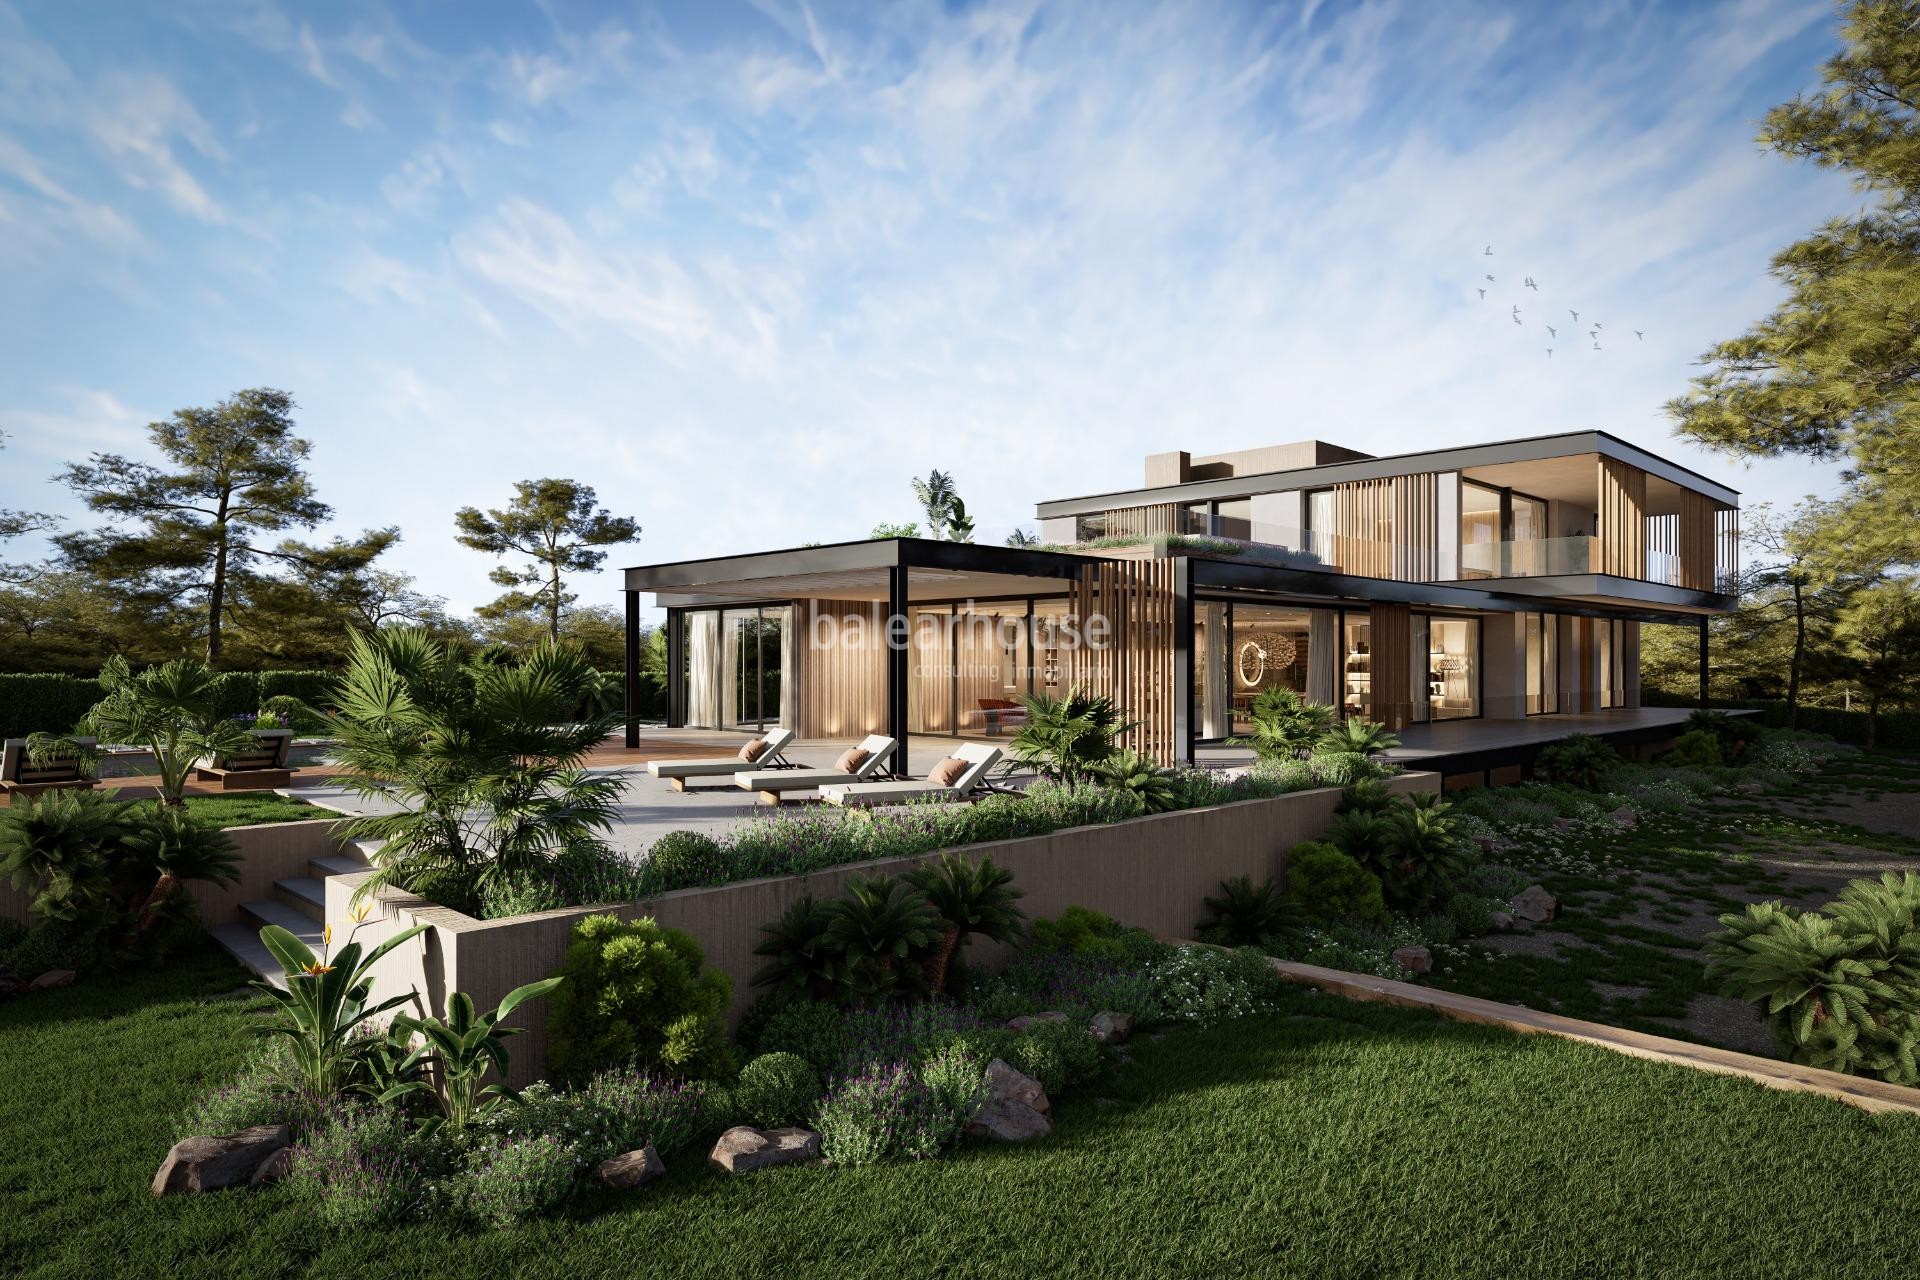 Plot of land in the excellent area of Sol de Mallorca with project for a spectacular modern villa.